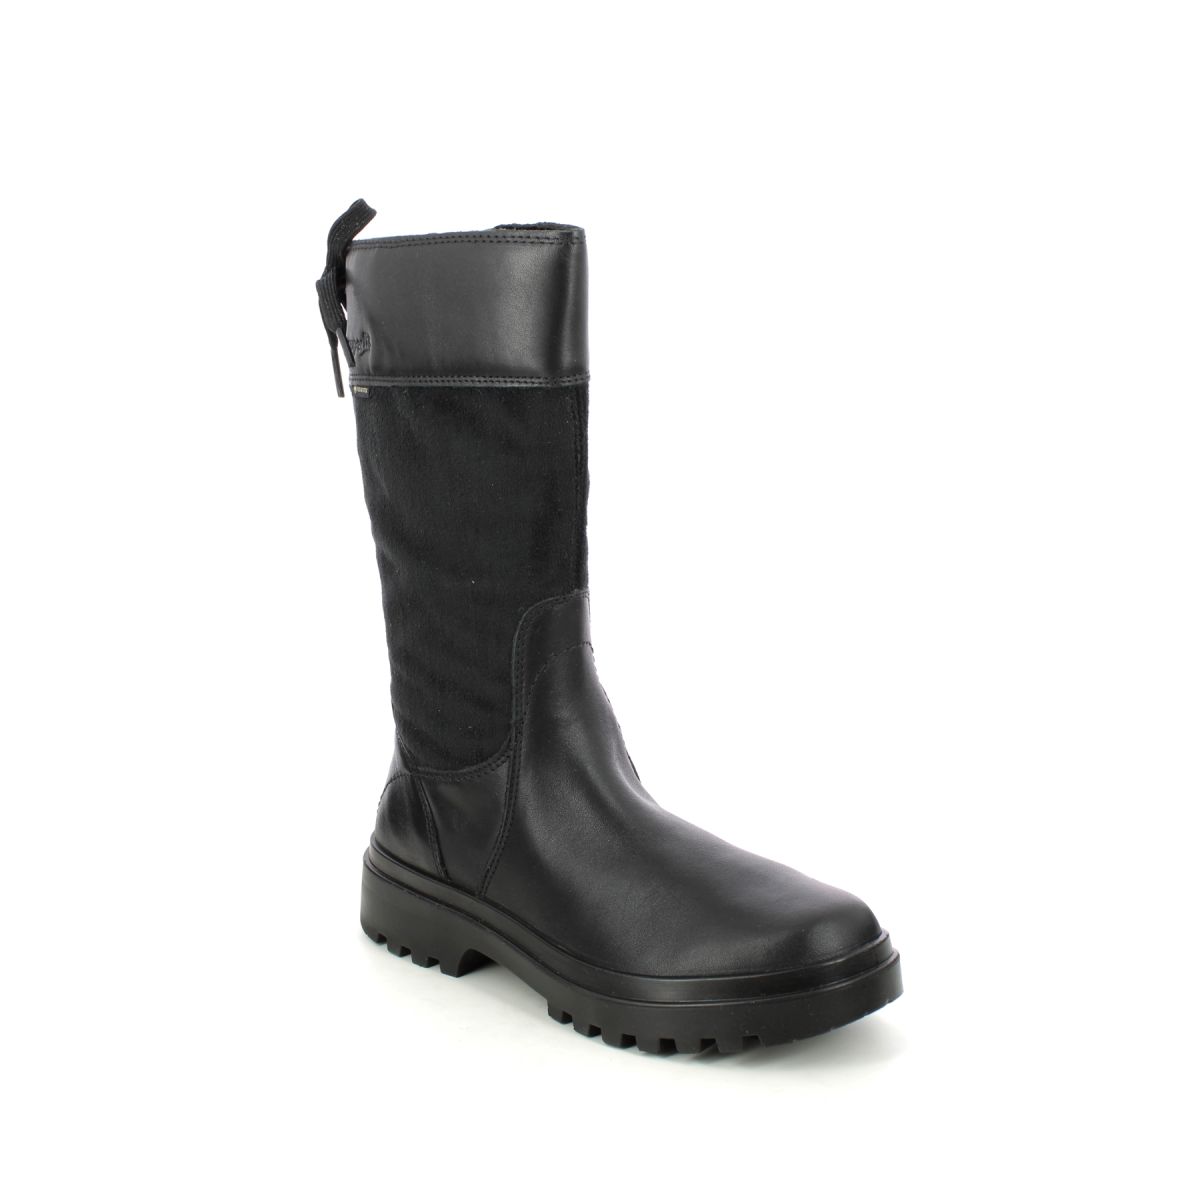 Superfit Abby Long Gtx Black Leather Kids Girls Boots 1000605-0000 In Size 37 In Plain Black Leather For kids